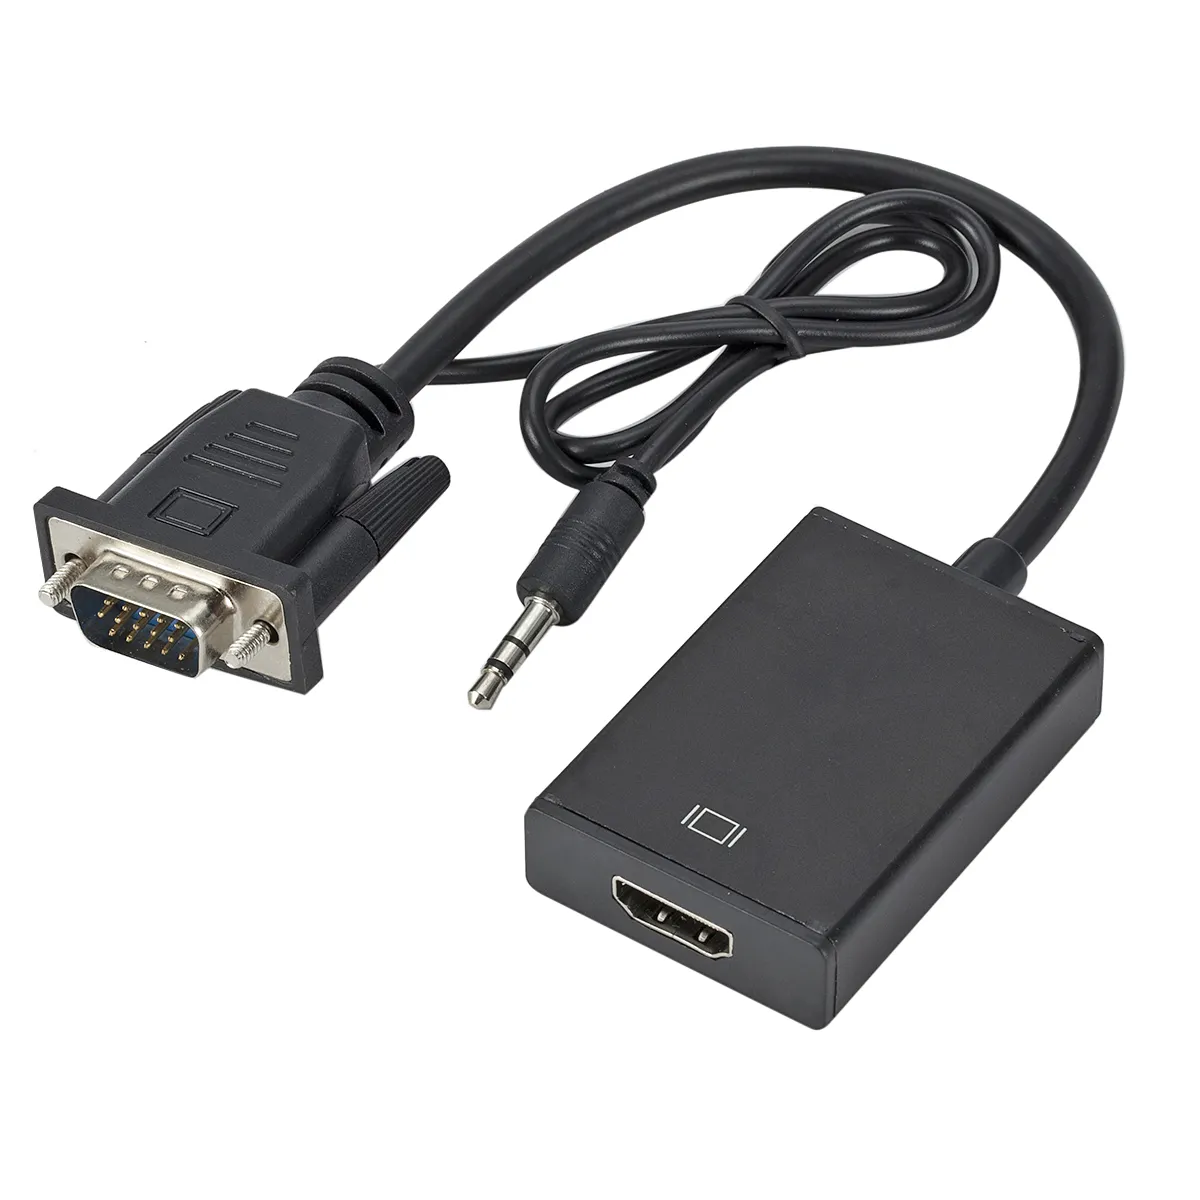 Vga to HDTV Cable Converter 1080P Vga male to HDTV Female Video Adapter with audio cable and power supply cable